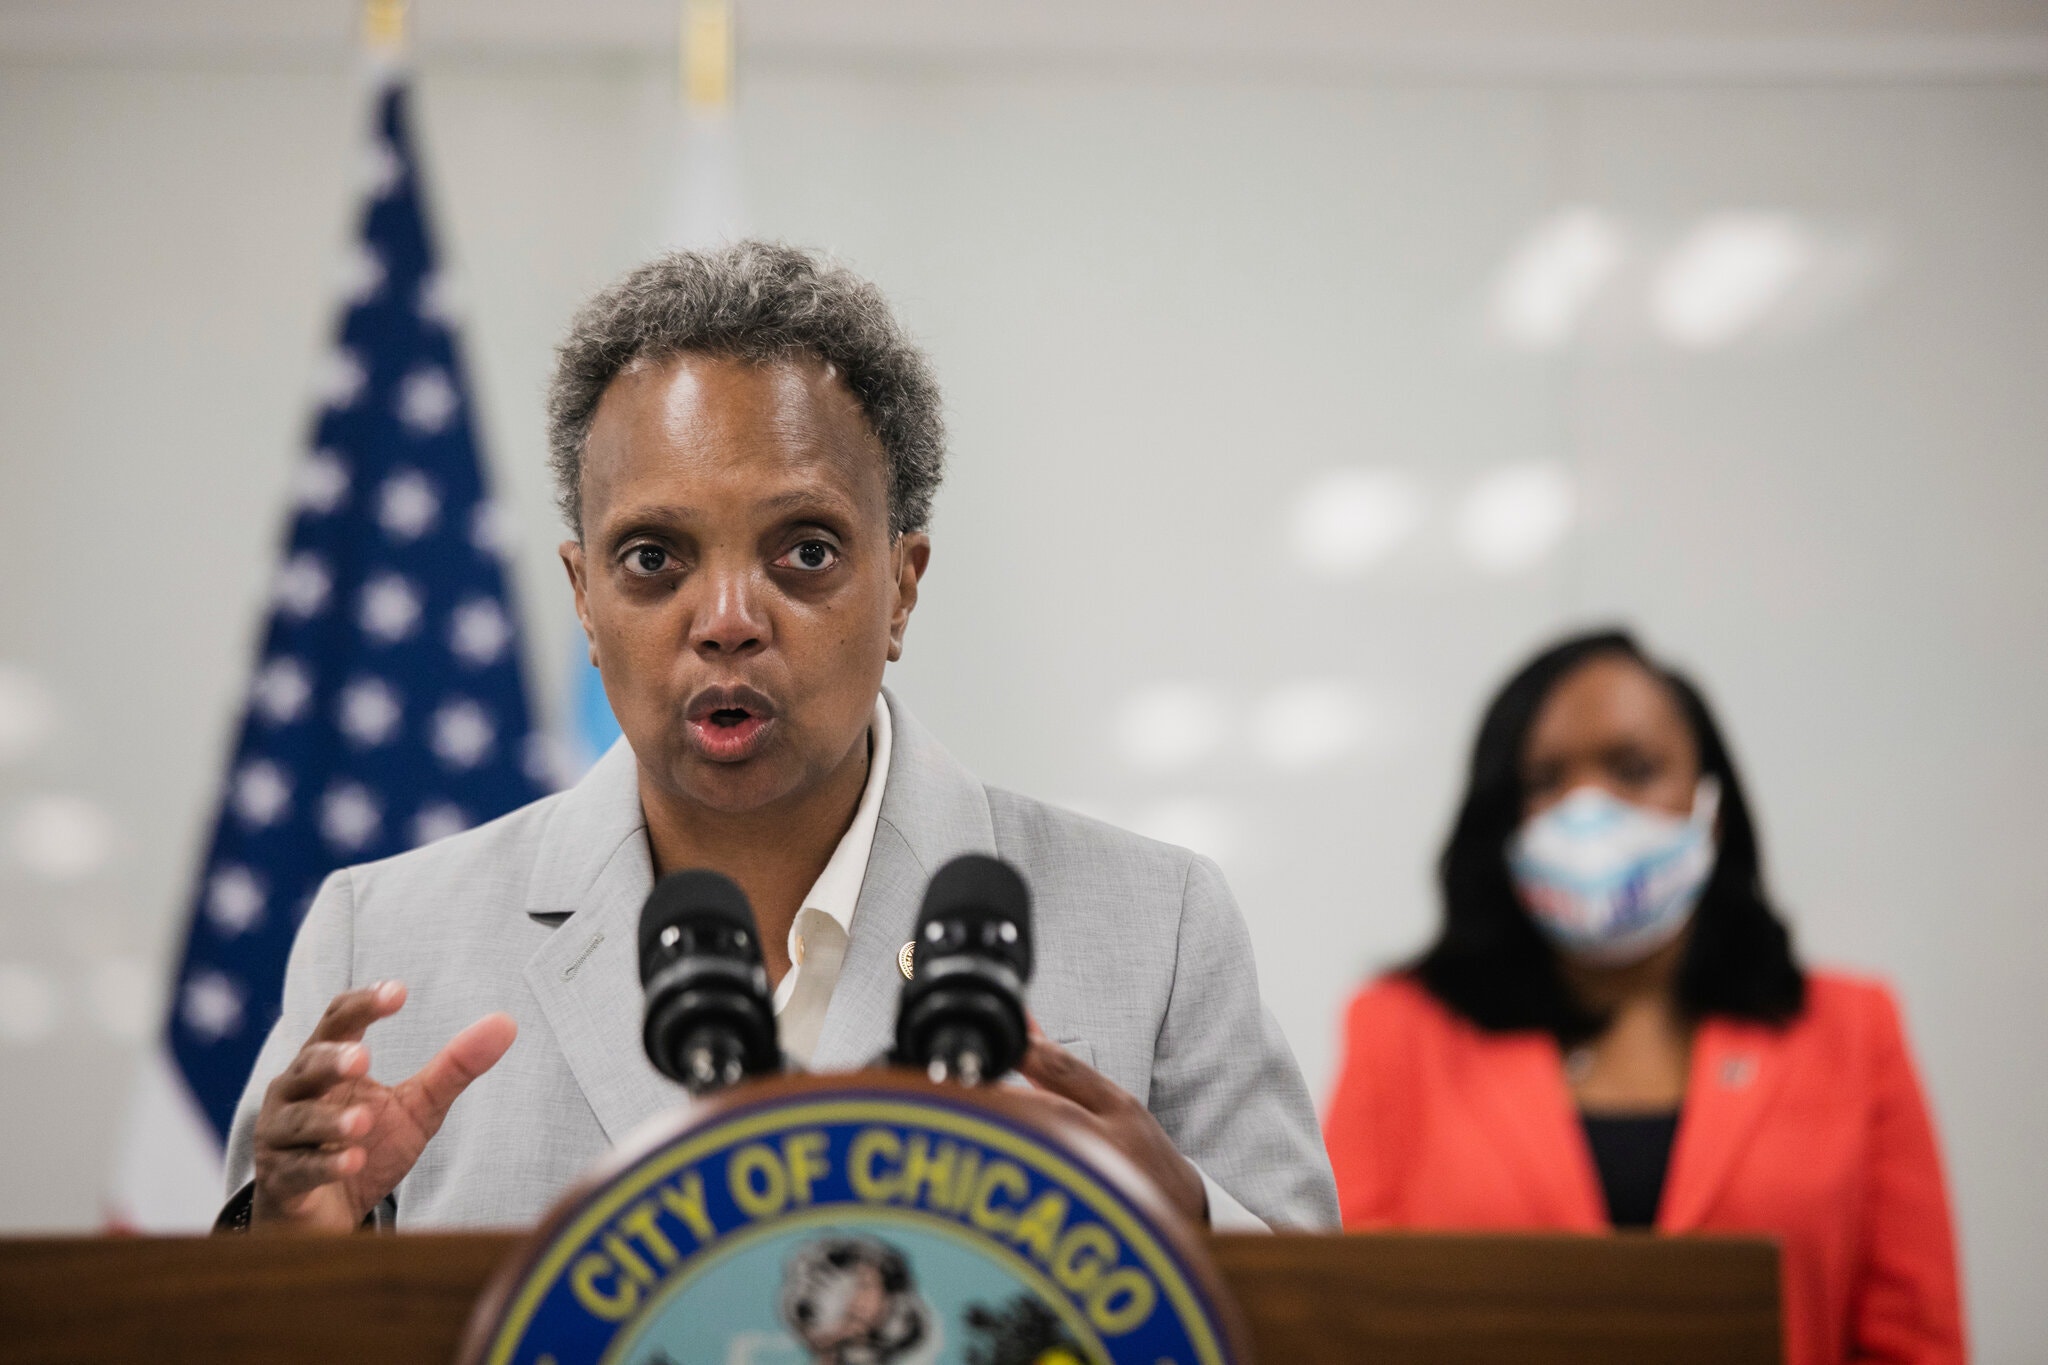 Chicago mayor will not allow “Portland-style” federal agents in city